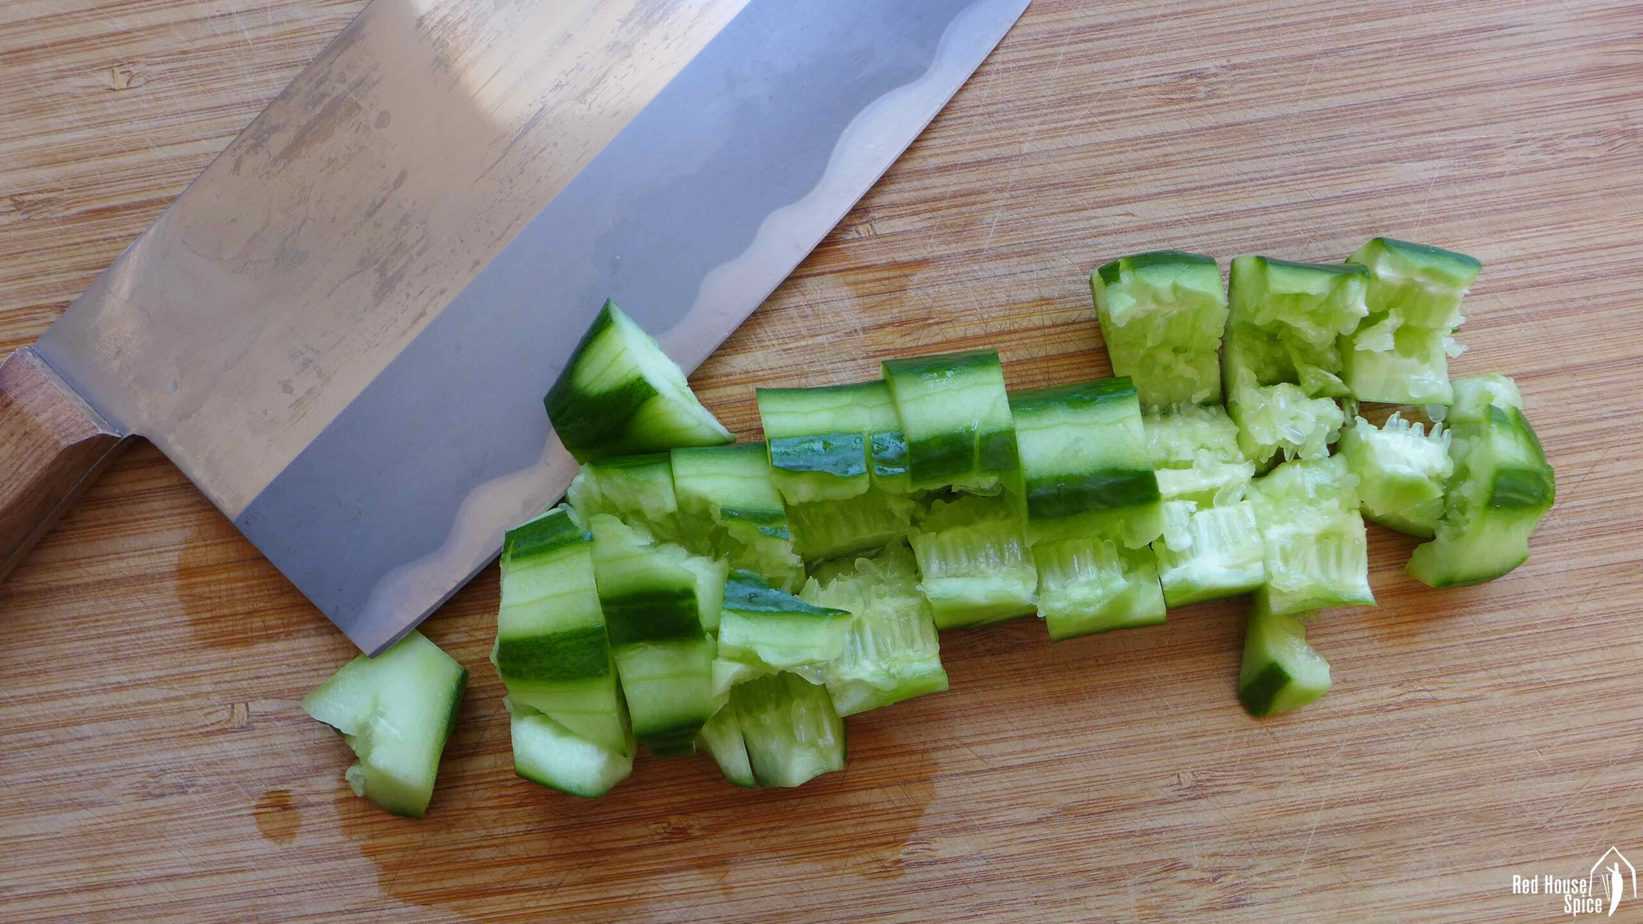 Cucumber smashed with a cleaver